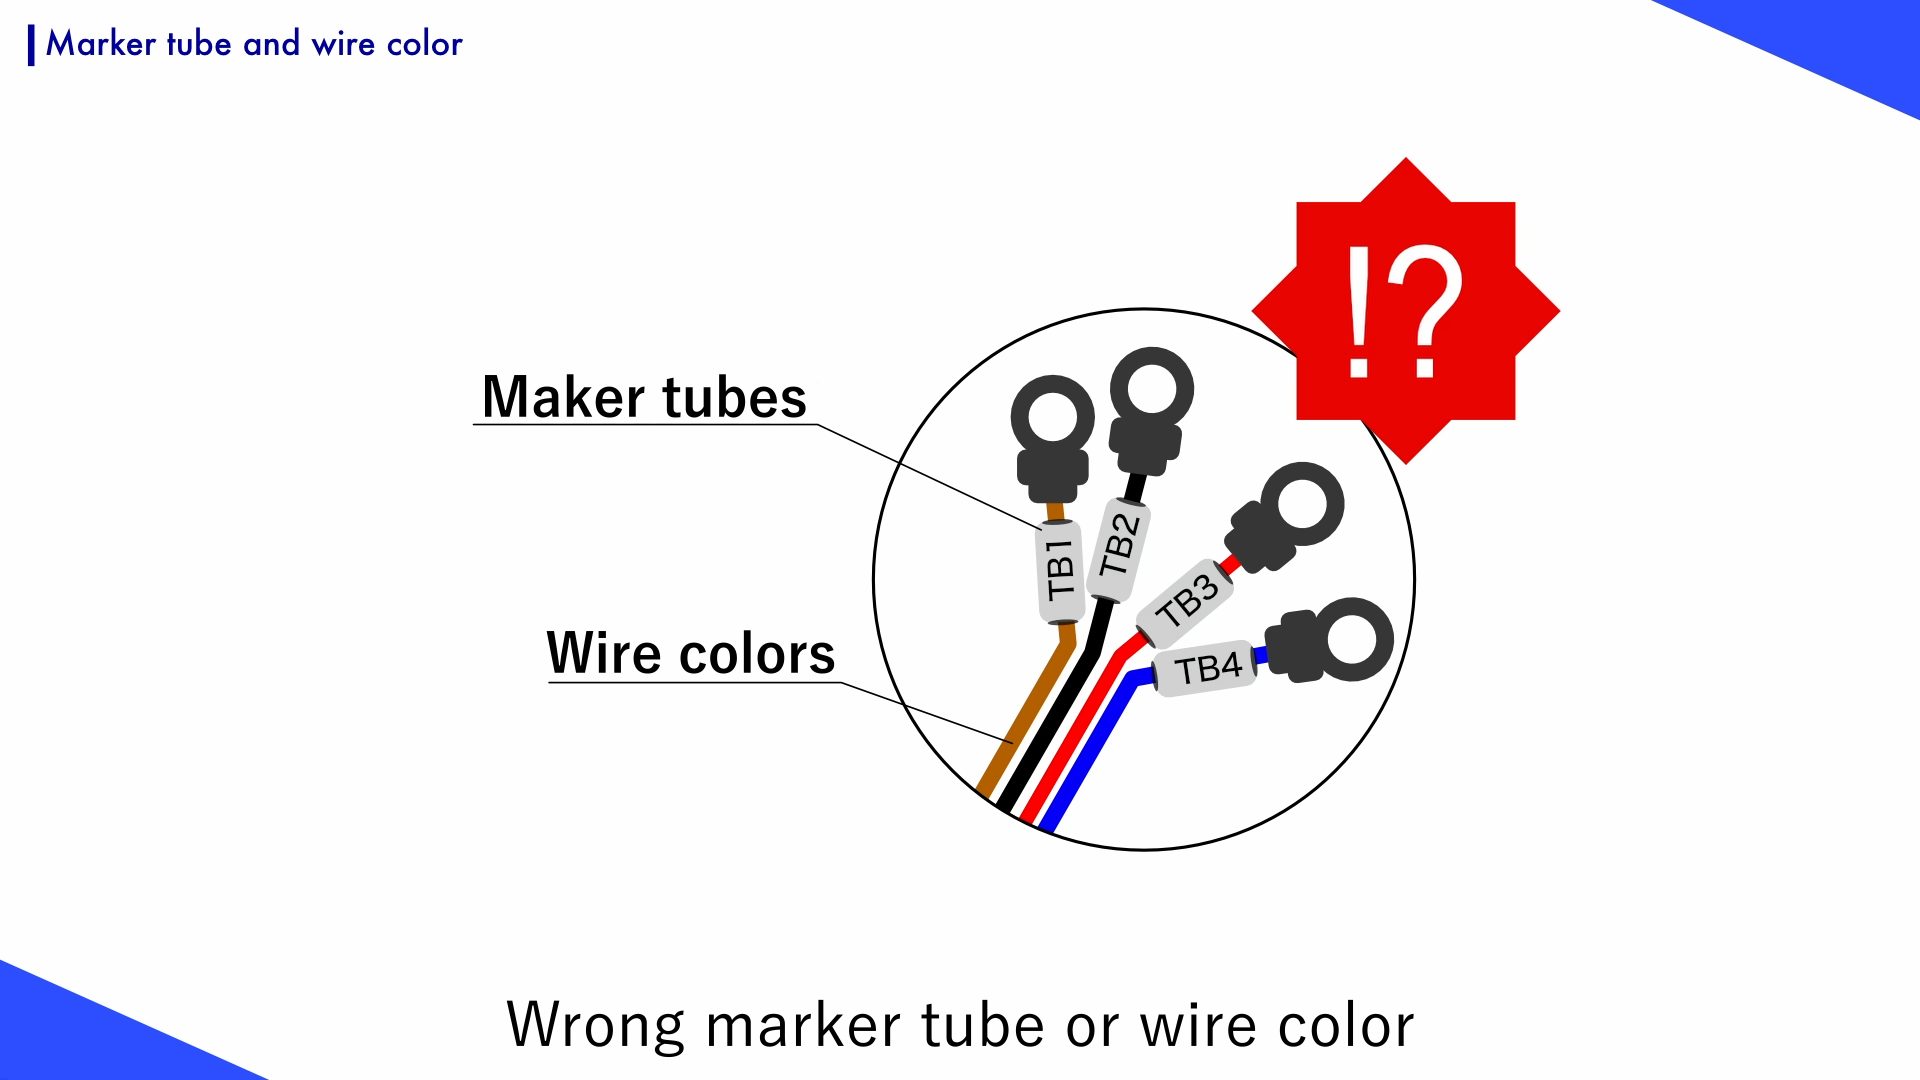 Label, marker tube, or cable color error is a defect in the cable or wire harness